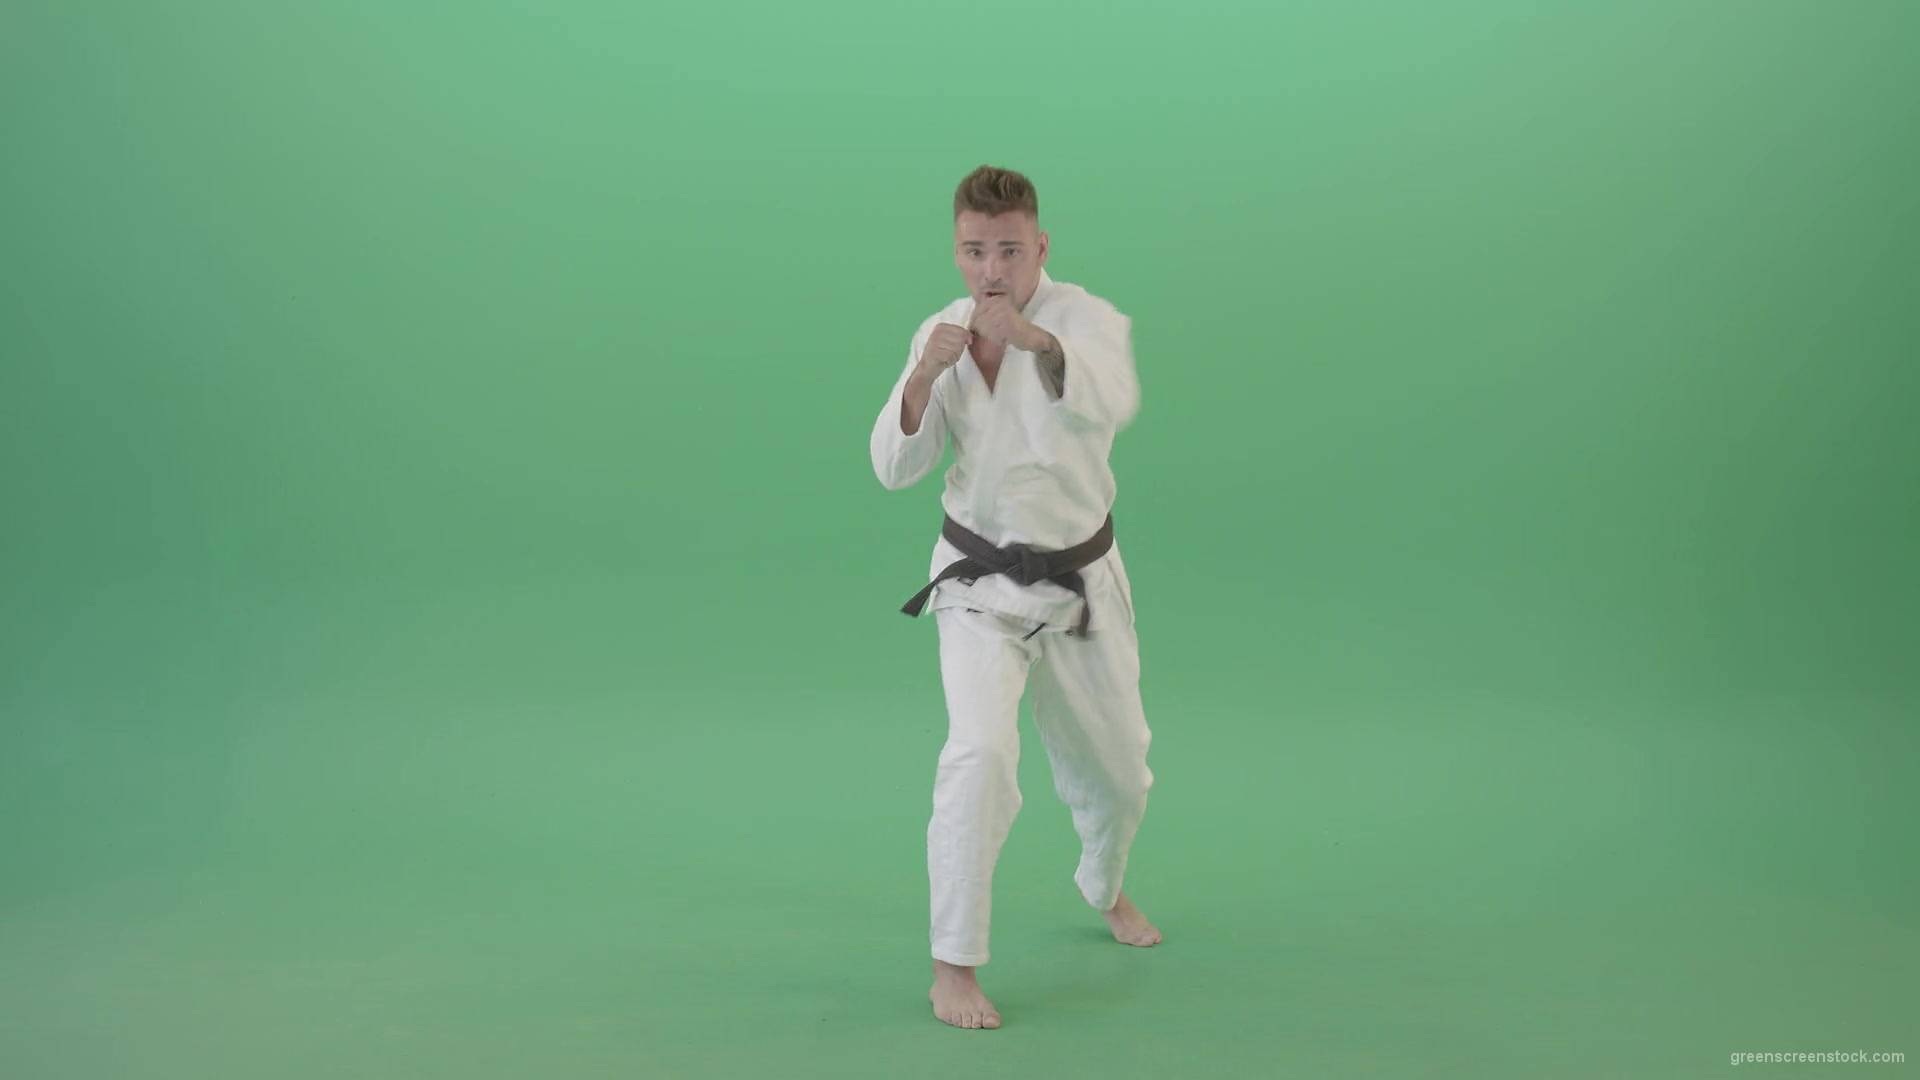 Karate-Man-boxing-making-punch-front-view-isolated-on-green-screen-1920_009 Green Screen Stock